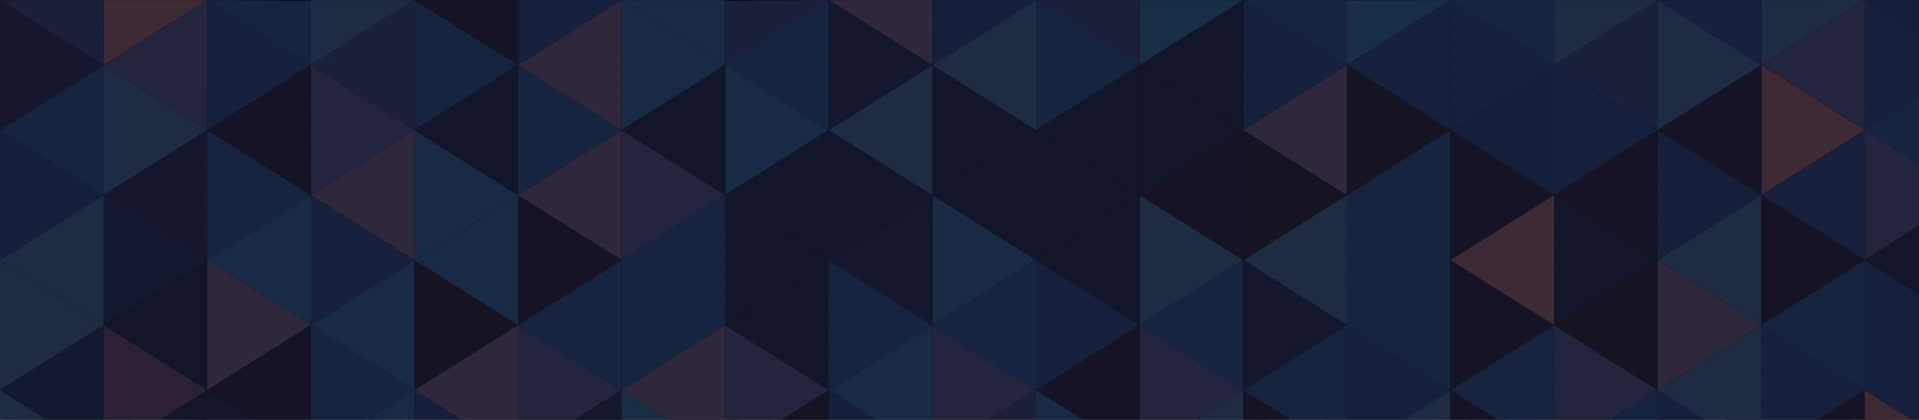 Background composed of isosceles triangles in different shades of blue. They recall the Joueurz logo, but also the "play" symbol found on everyday devices.